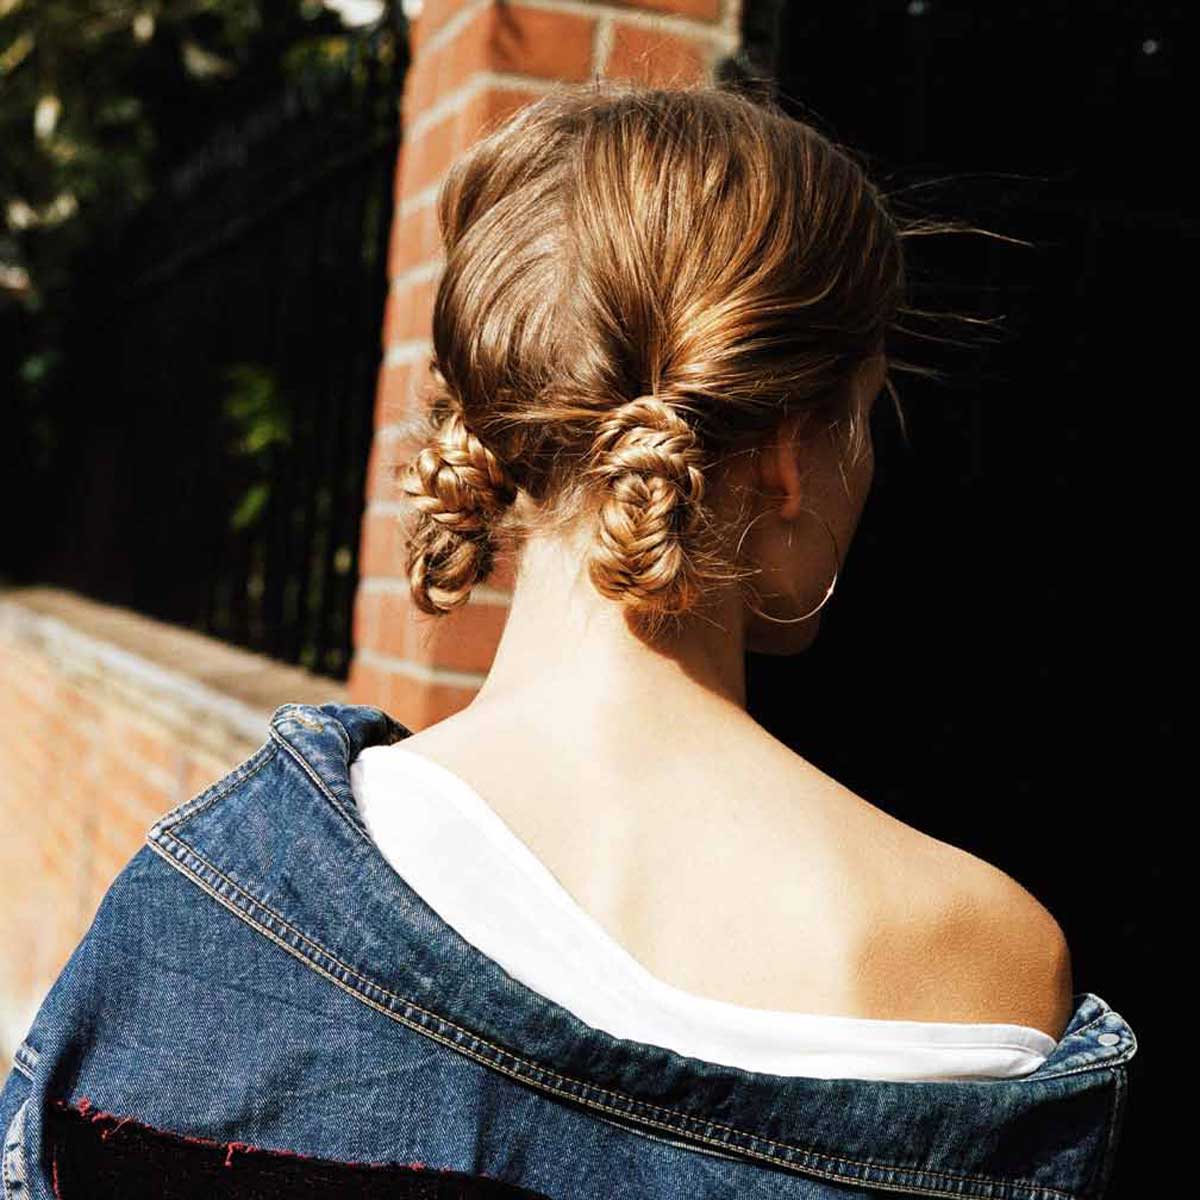 Twisted sista: A kooky combo of two fishtail braids and low knots - twisted together to form an updated up-do with undone charm.